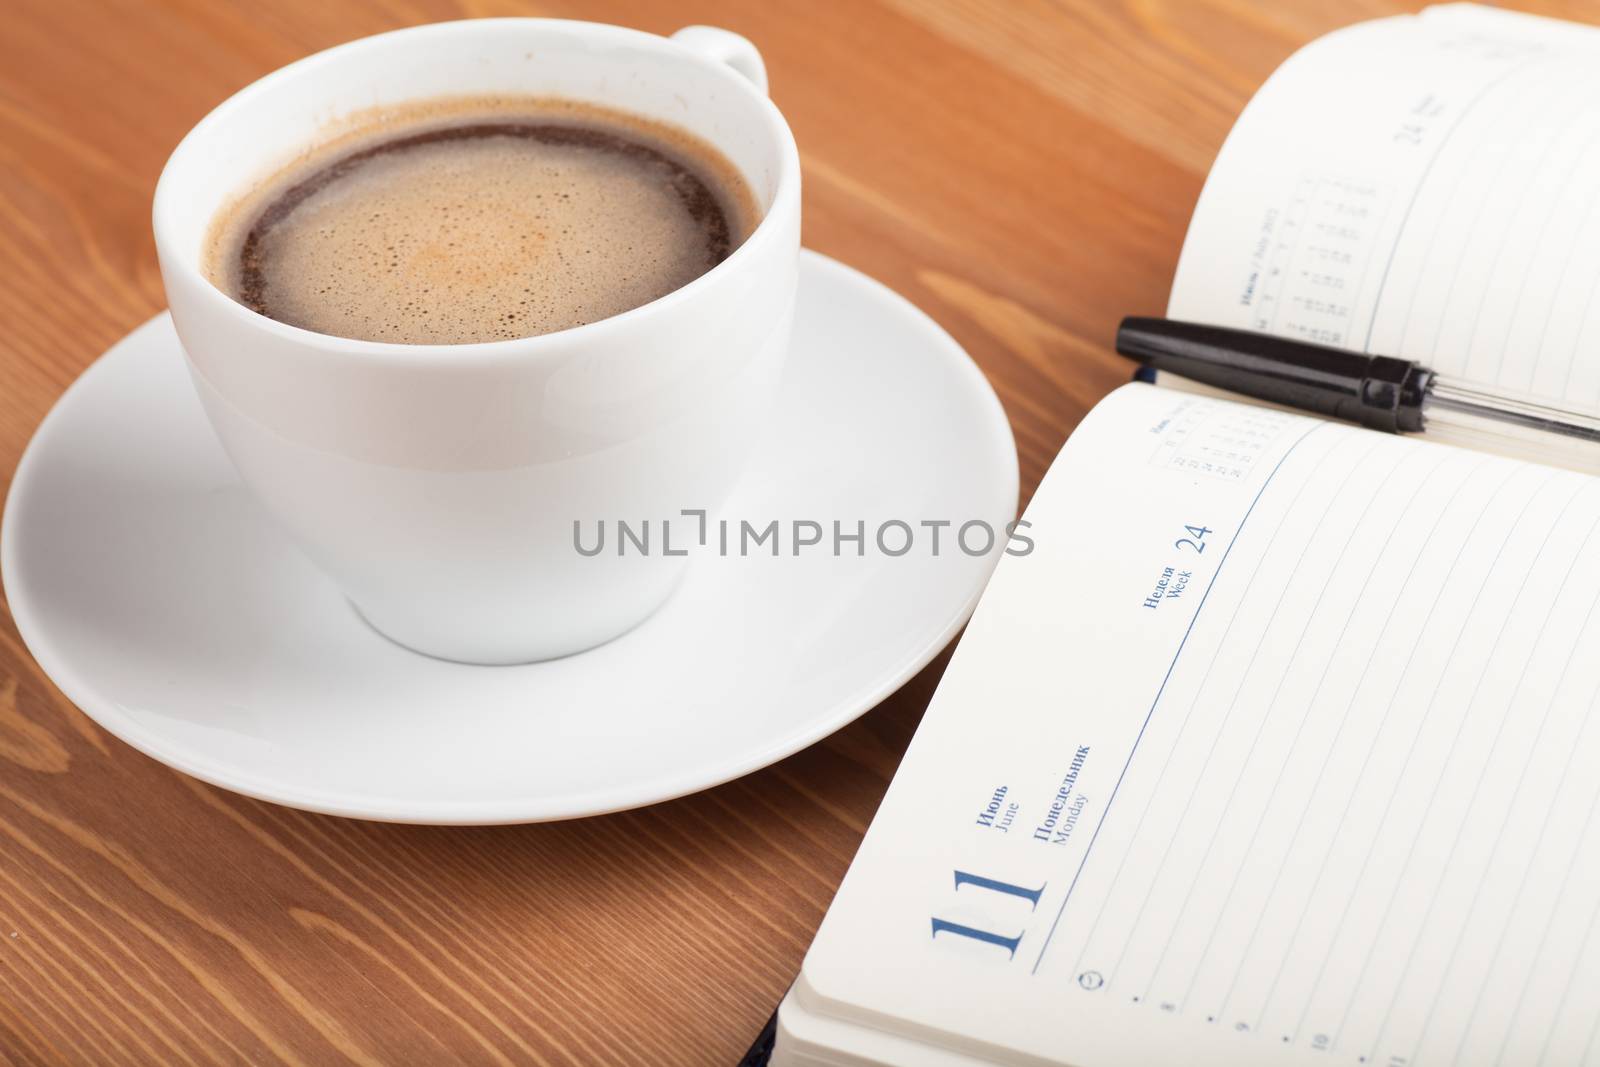 Notebook with pen and cup of coffee on a table. Top view